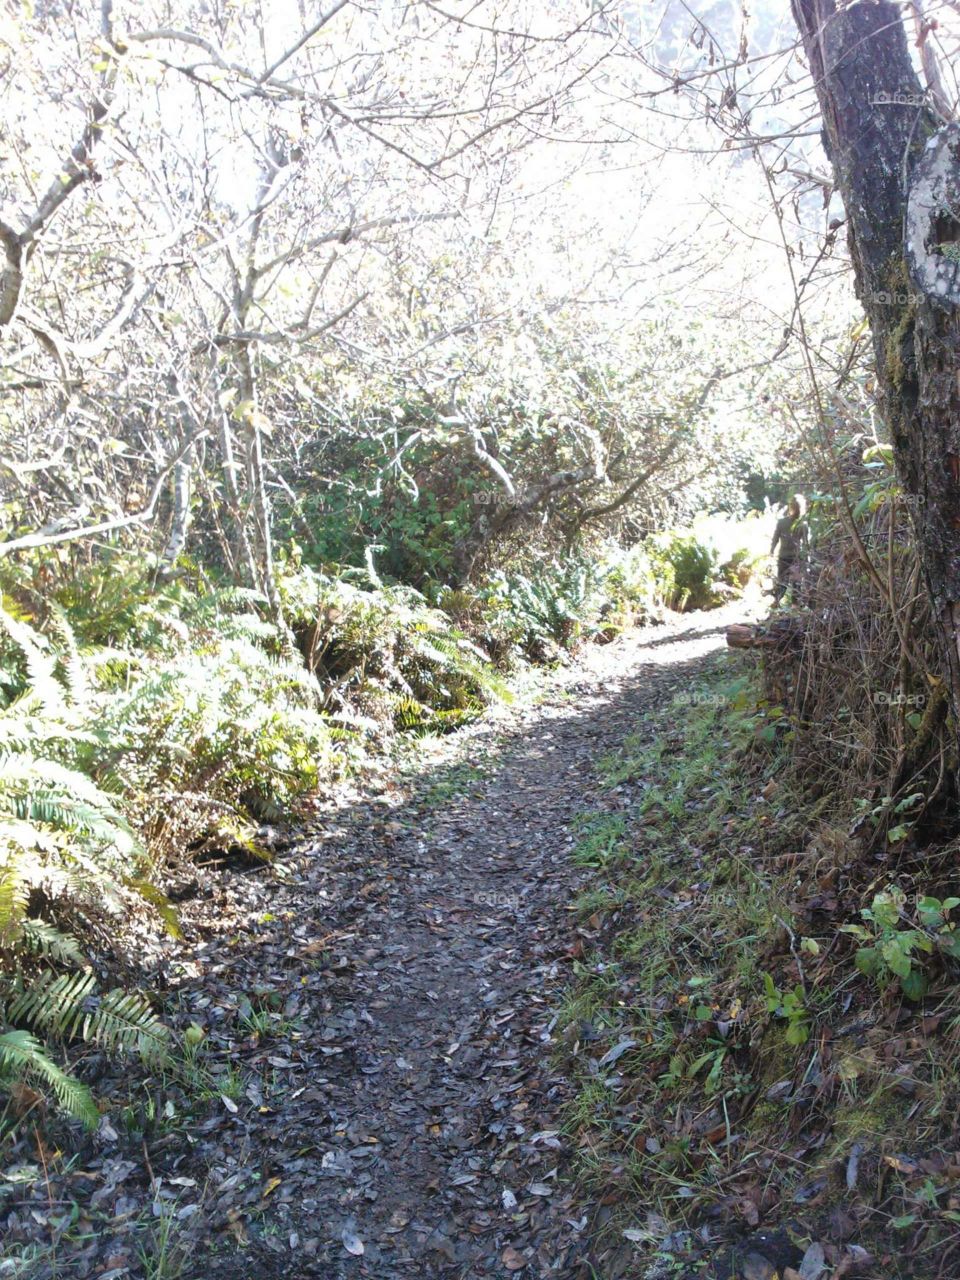 The leaves keep this path moist and muddy, but also beautiful in the fall (Fort Bragg, CA)